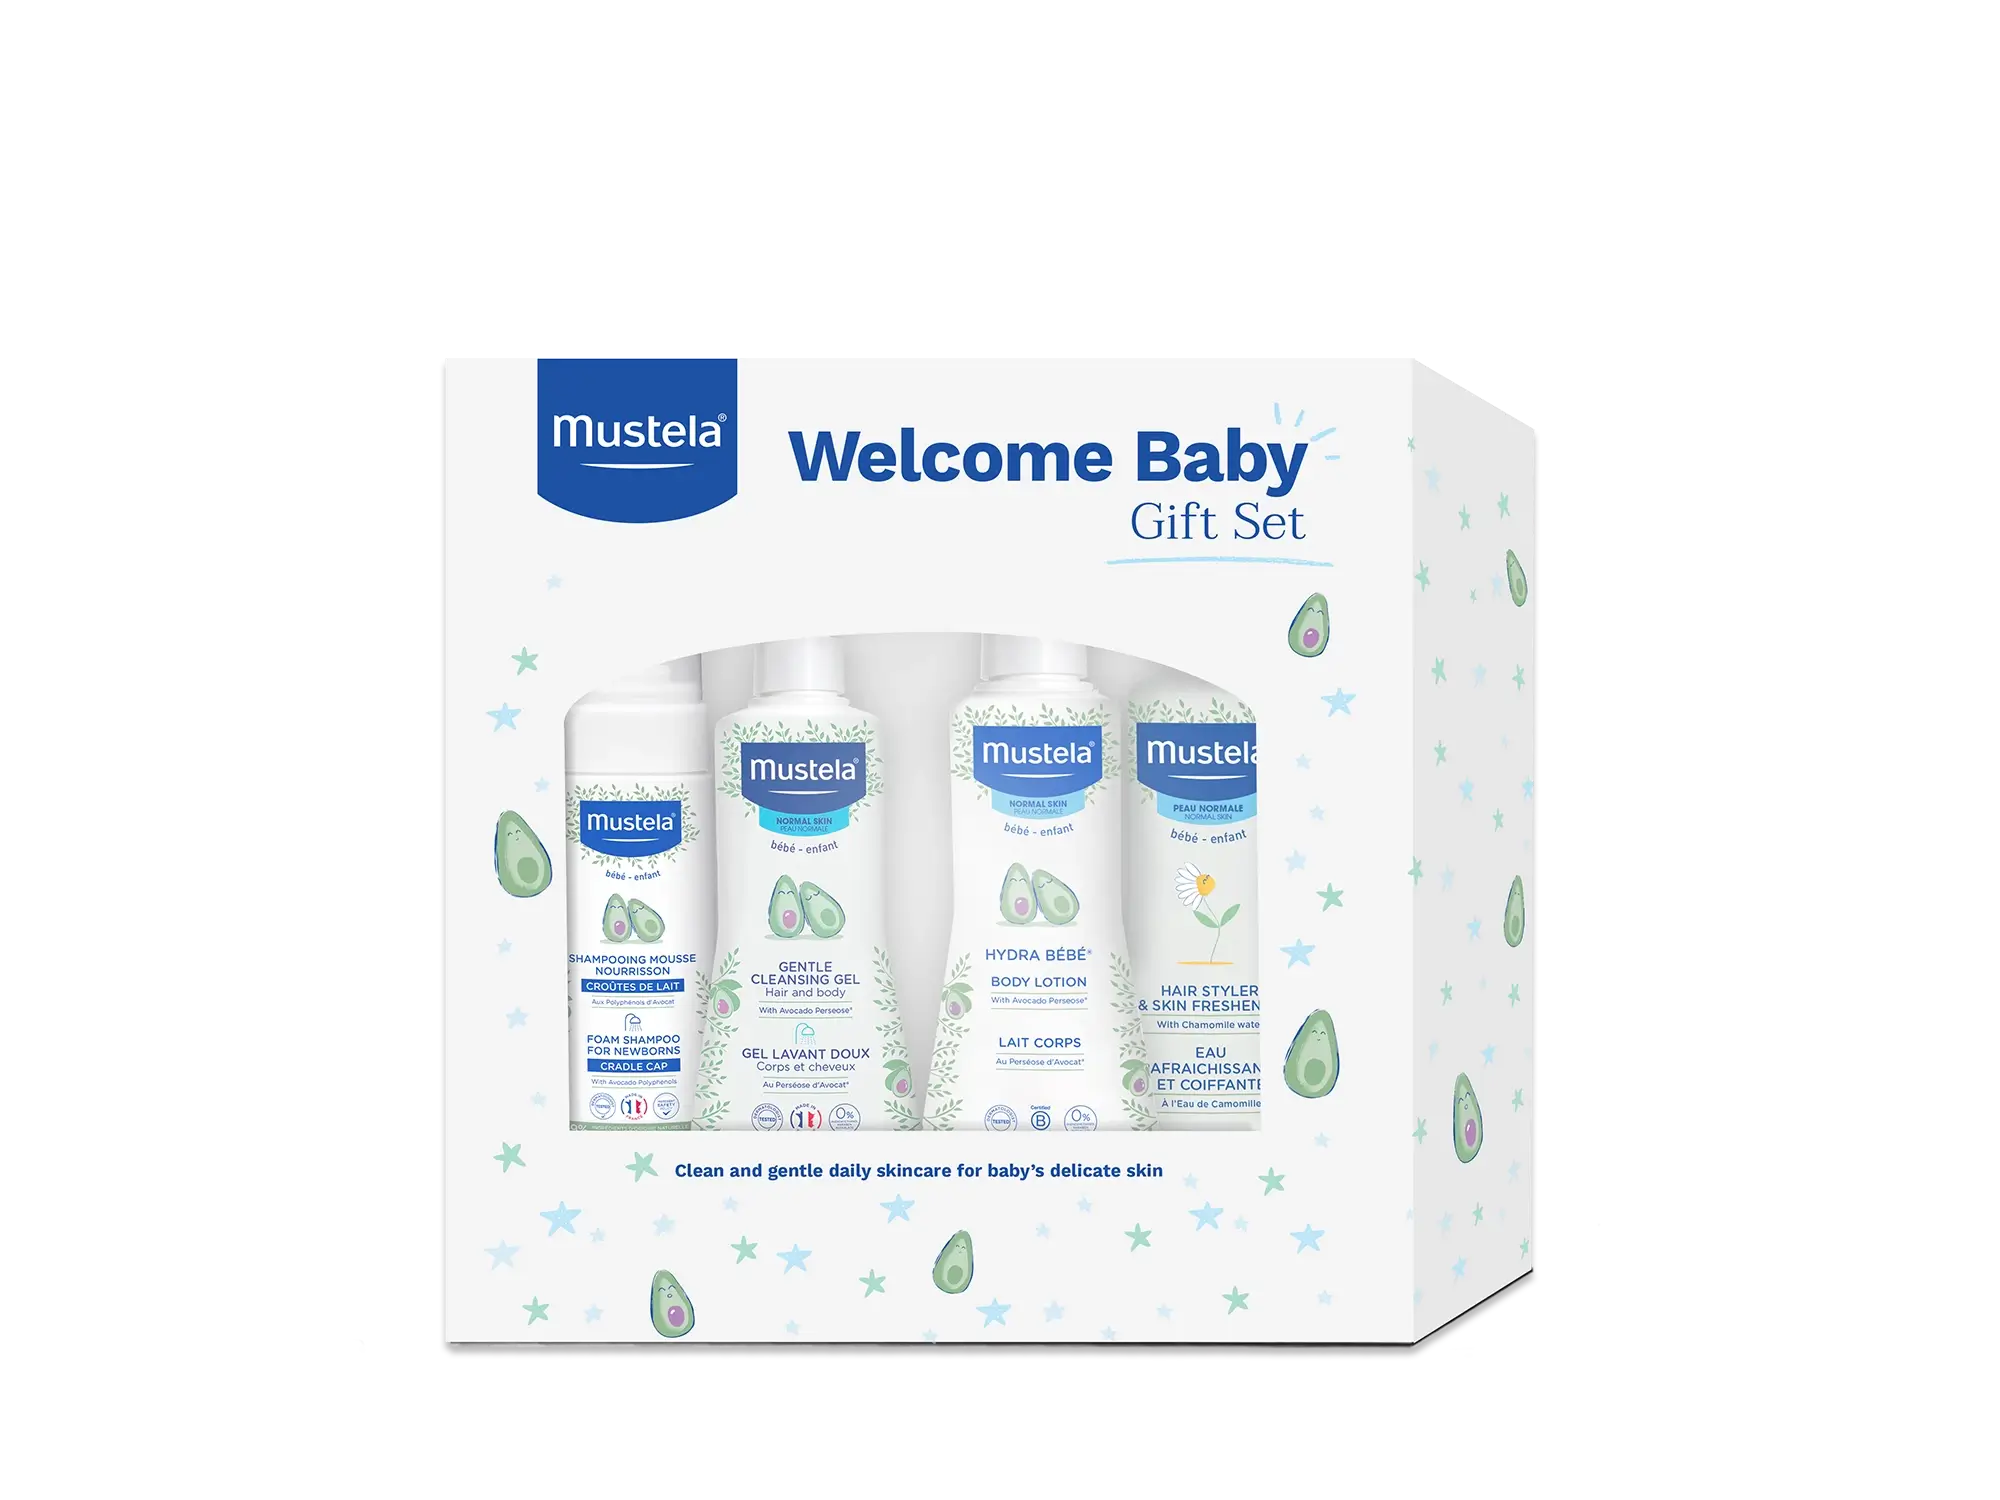 Mustela Newborn Arrival Gift Set - Baby Skincare & Bath Time Essentials -  Natural & Plant Based - 5 Items Set